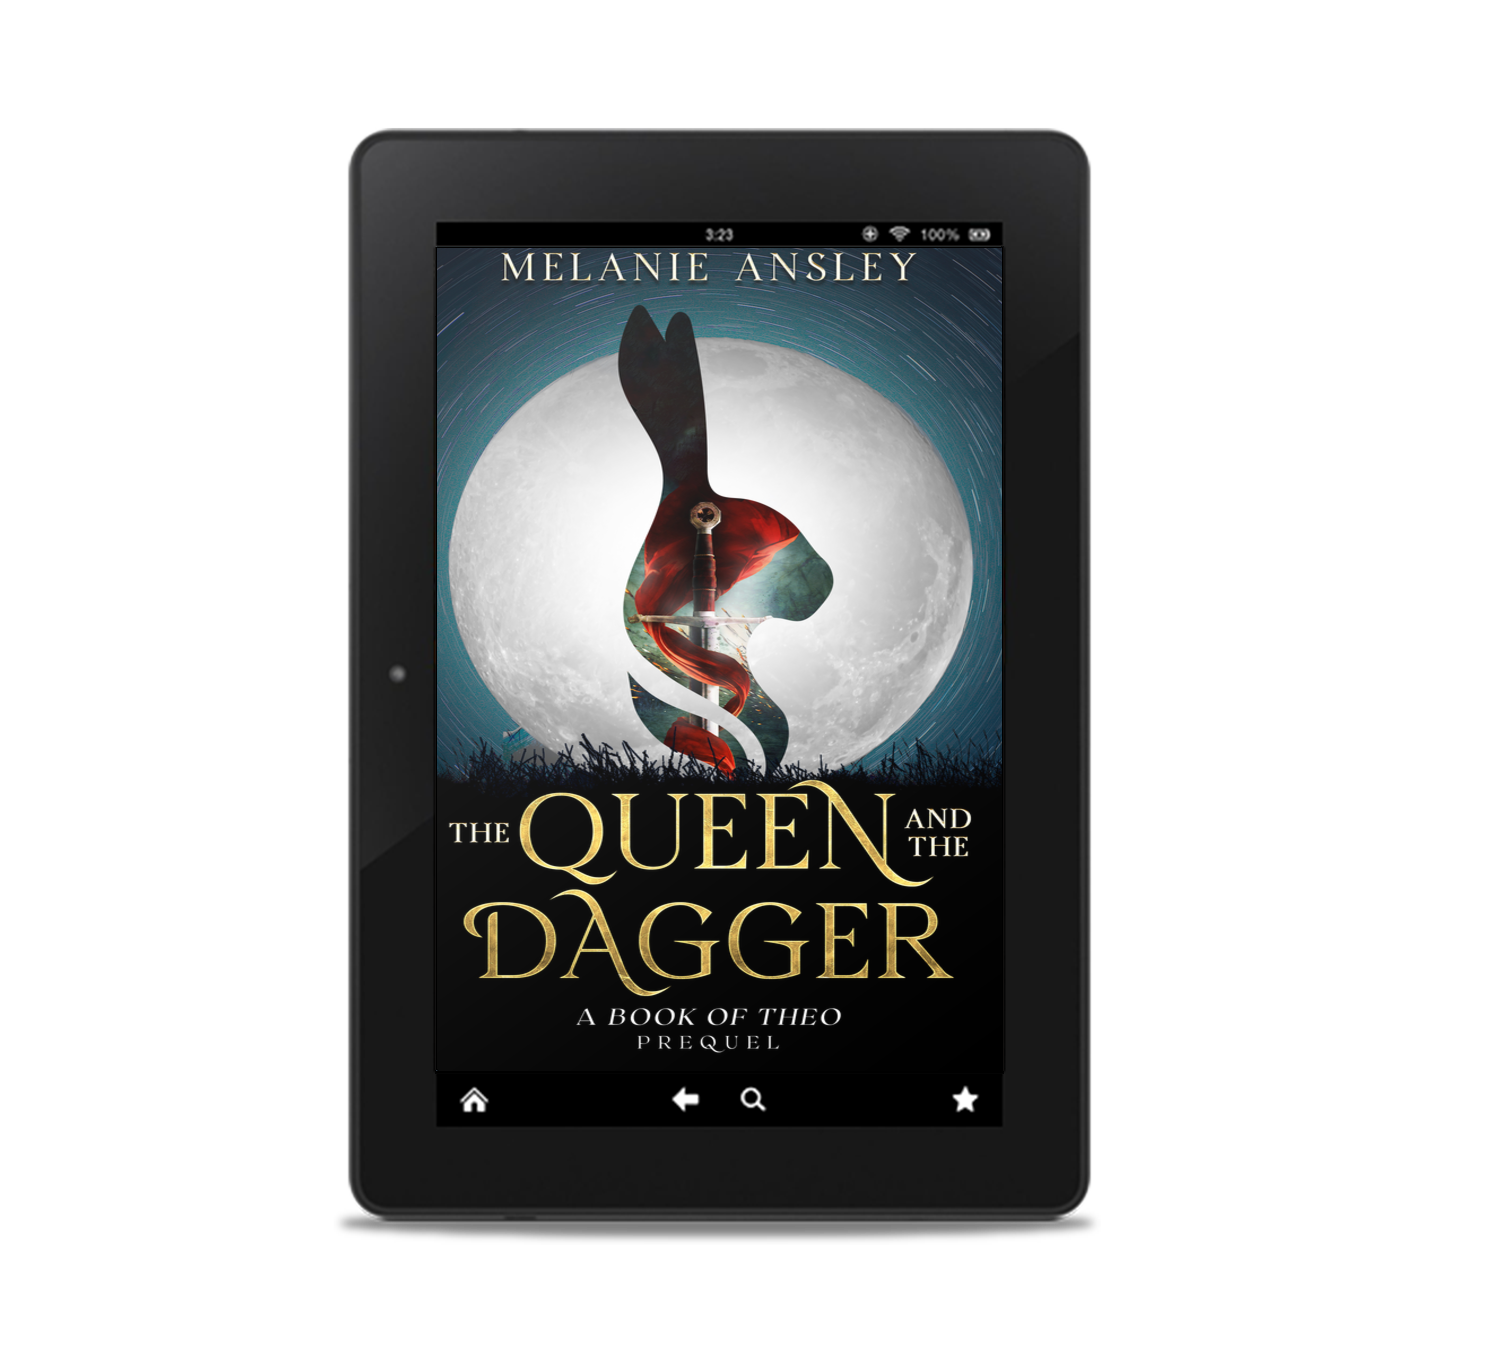 Queen and the Dagger book covers